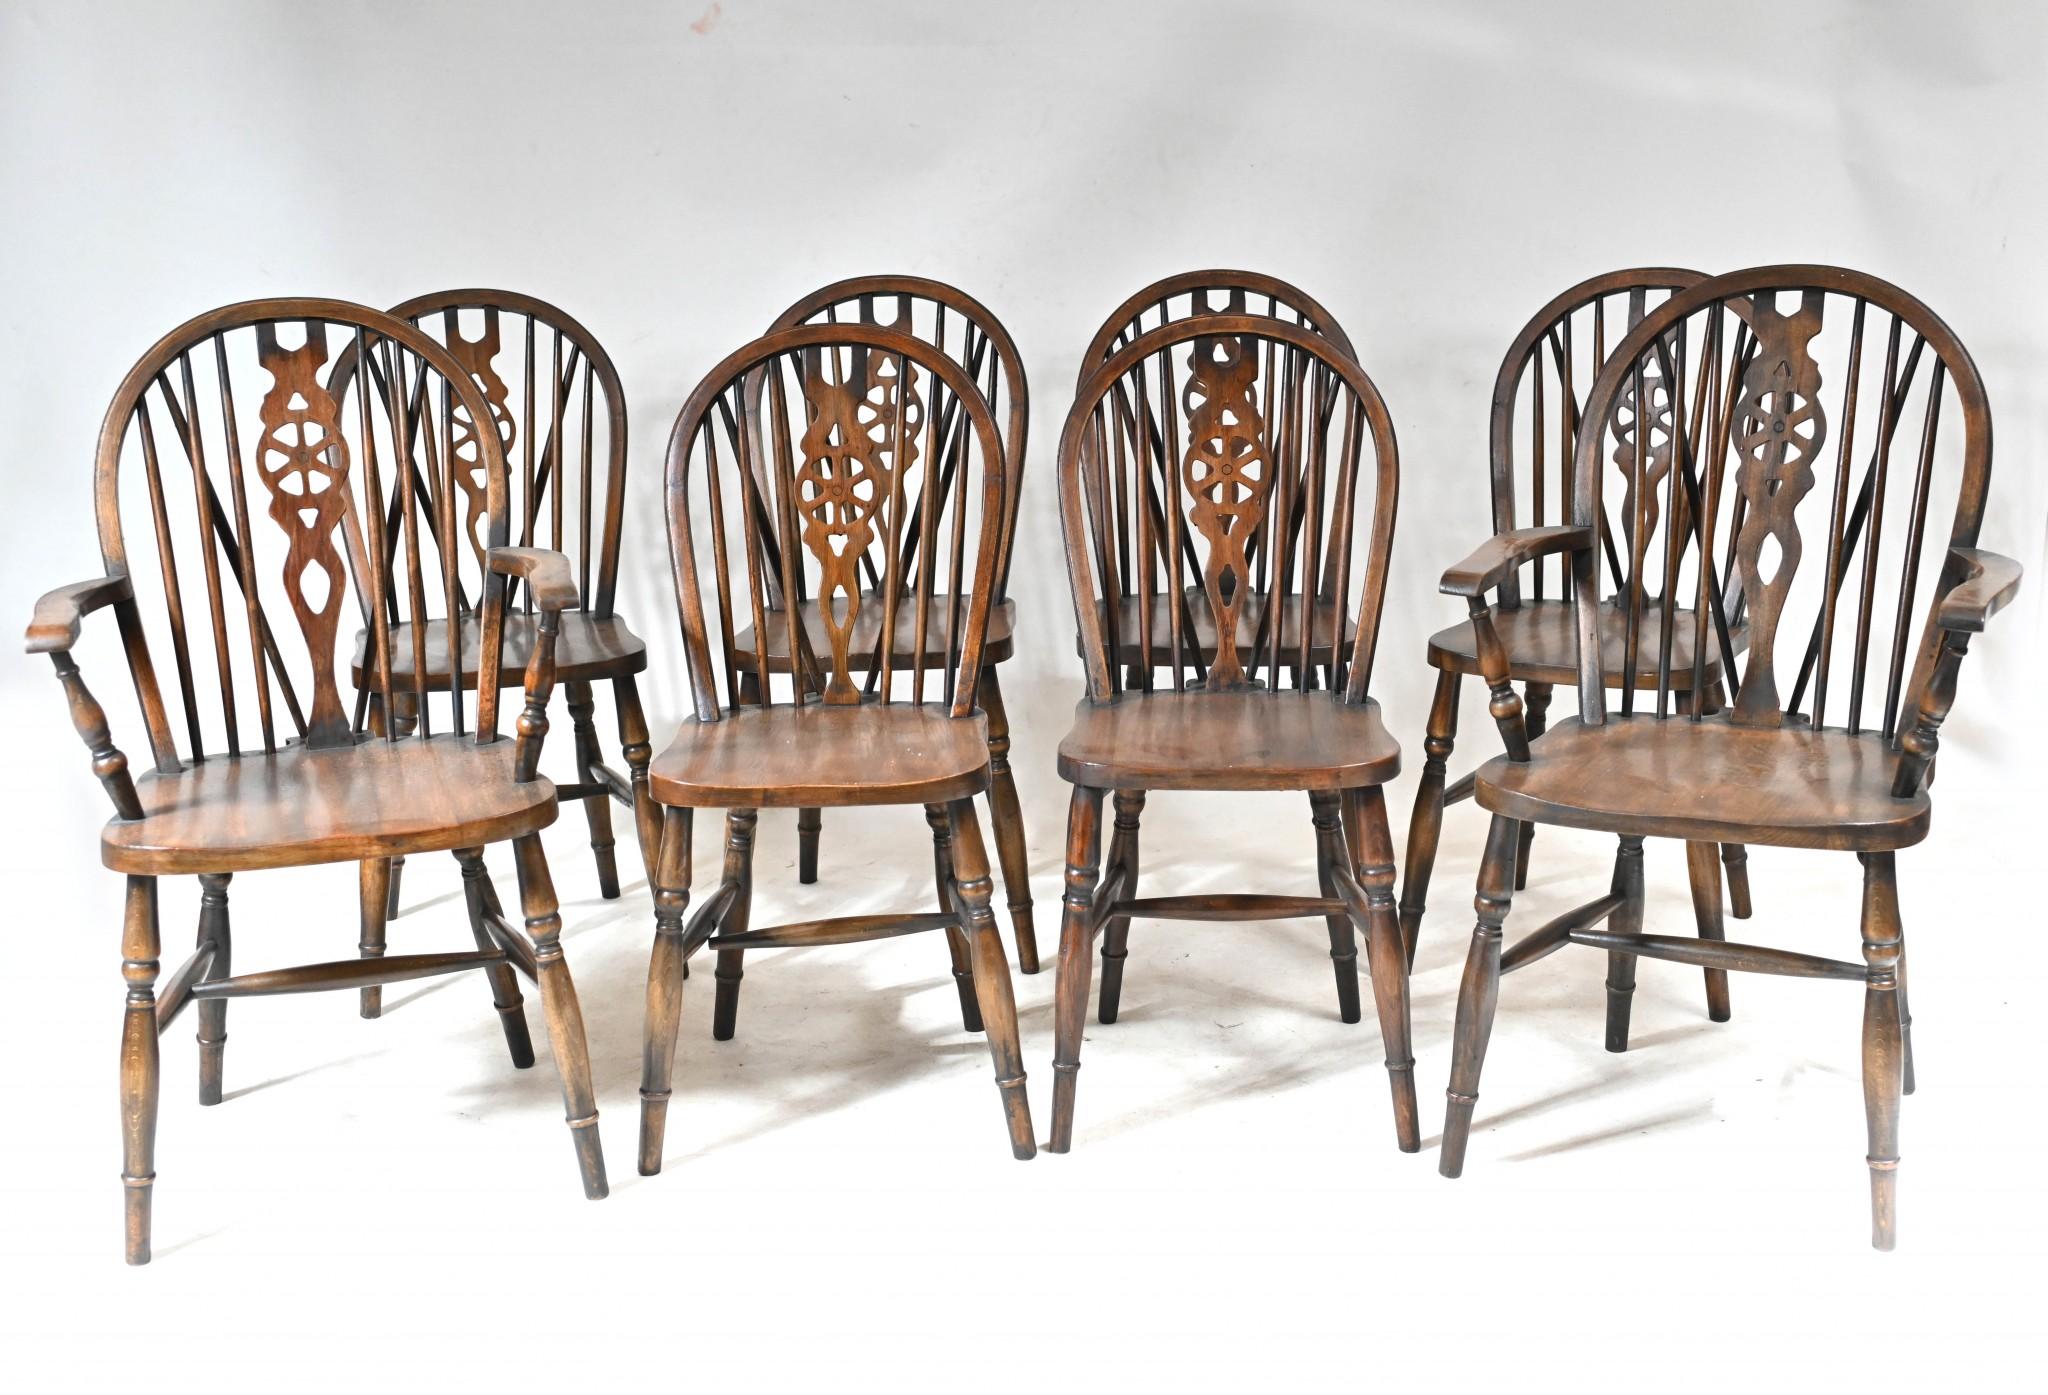 Stunning set of 8 Windsor arm chairs with distinctive wheelbacks
Classic farmhouse dining chairs and we date this set to circa 1890
We have various refectory tables to match if you are looking for a complete dining set up
Set consists of two arm